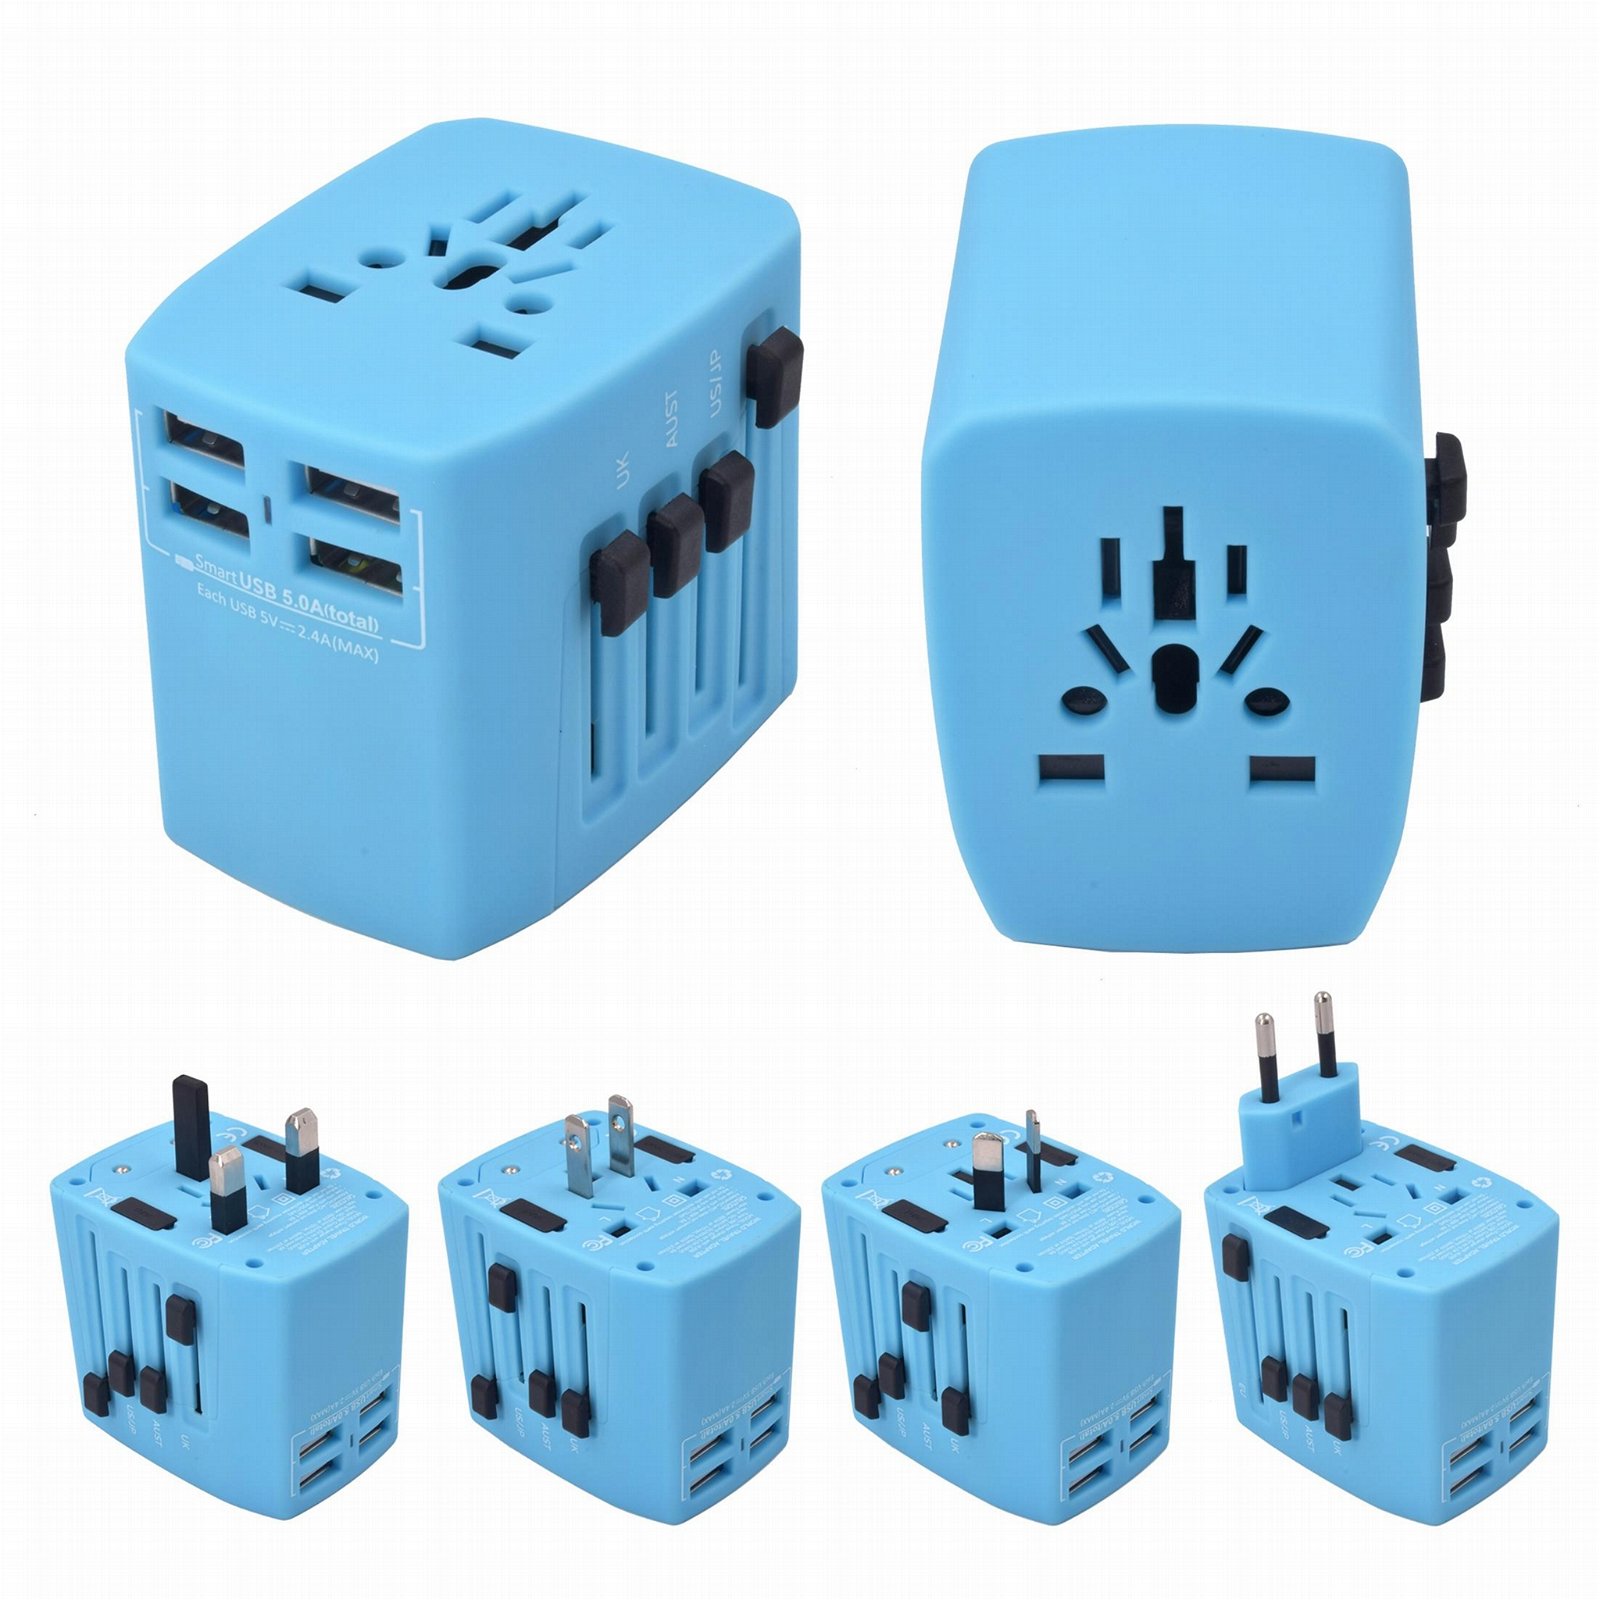 World Travel Adapter with 4 USB Charger ( DY-025 )